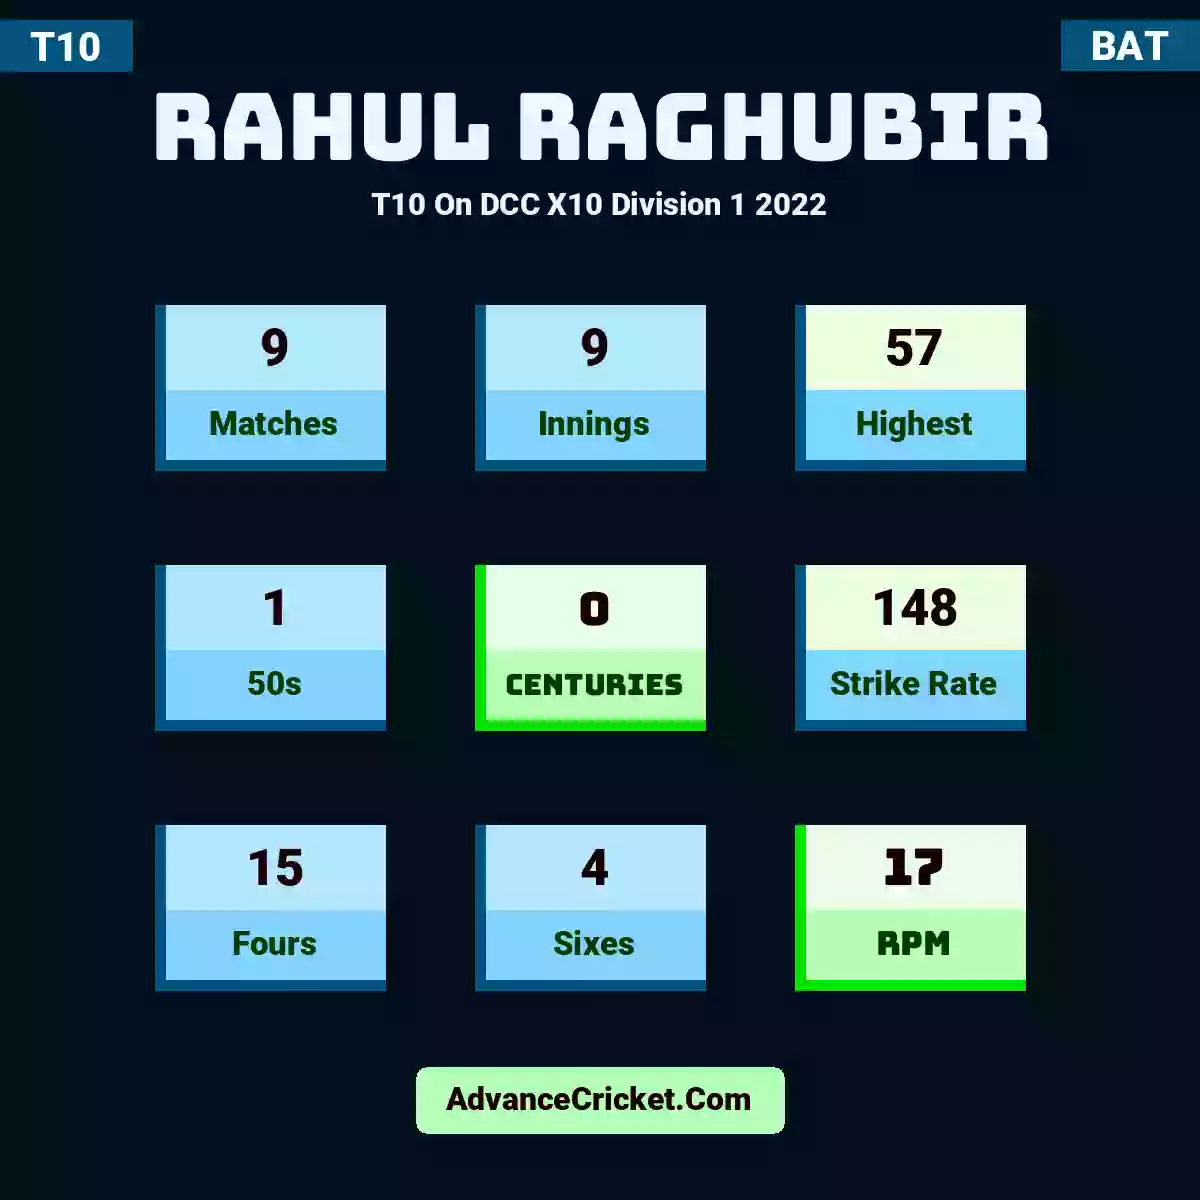 Rahul Raghubir T10  On DCC X10 Division 1 2022, Rahul Raghubir played 9 matches, scored 57 runs as highest, 1 half-centuries, and 0 centuries, with a strike rate of 148. R.Raghubir hit 15 fours and 4 sixes, with an RPM of 17.